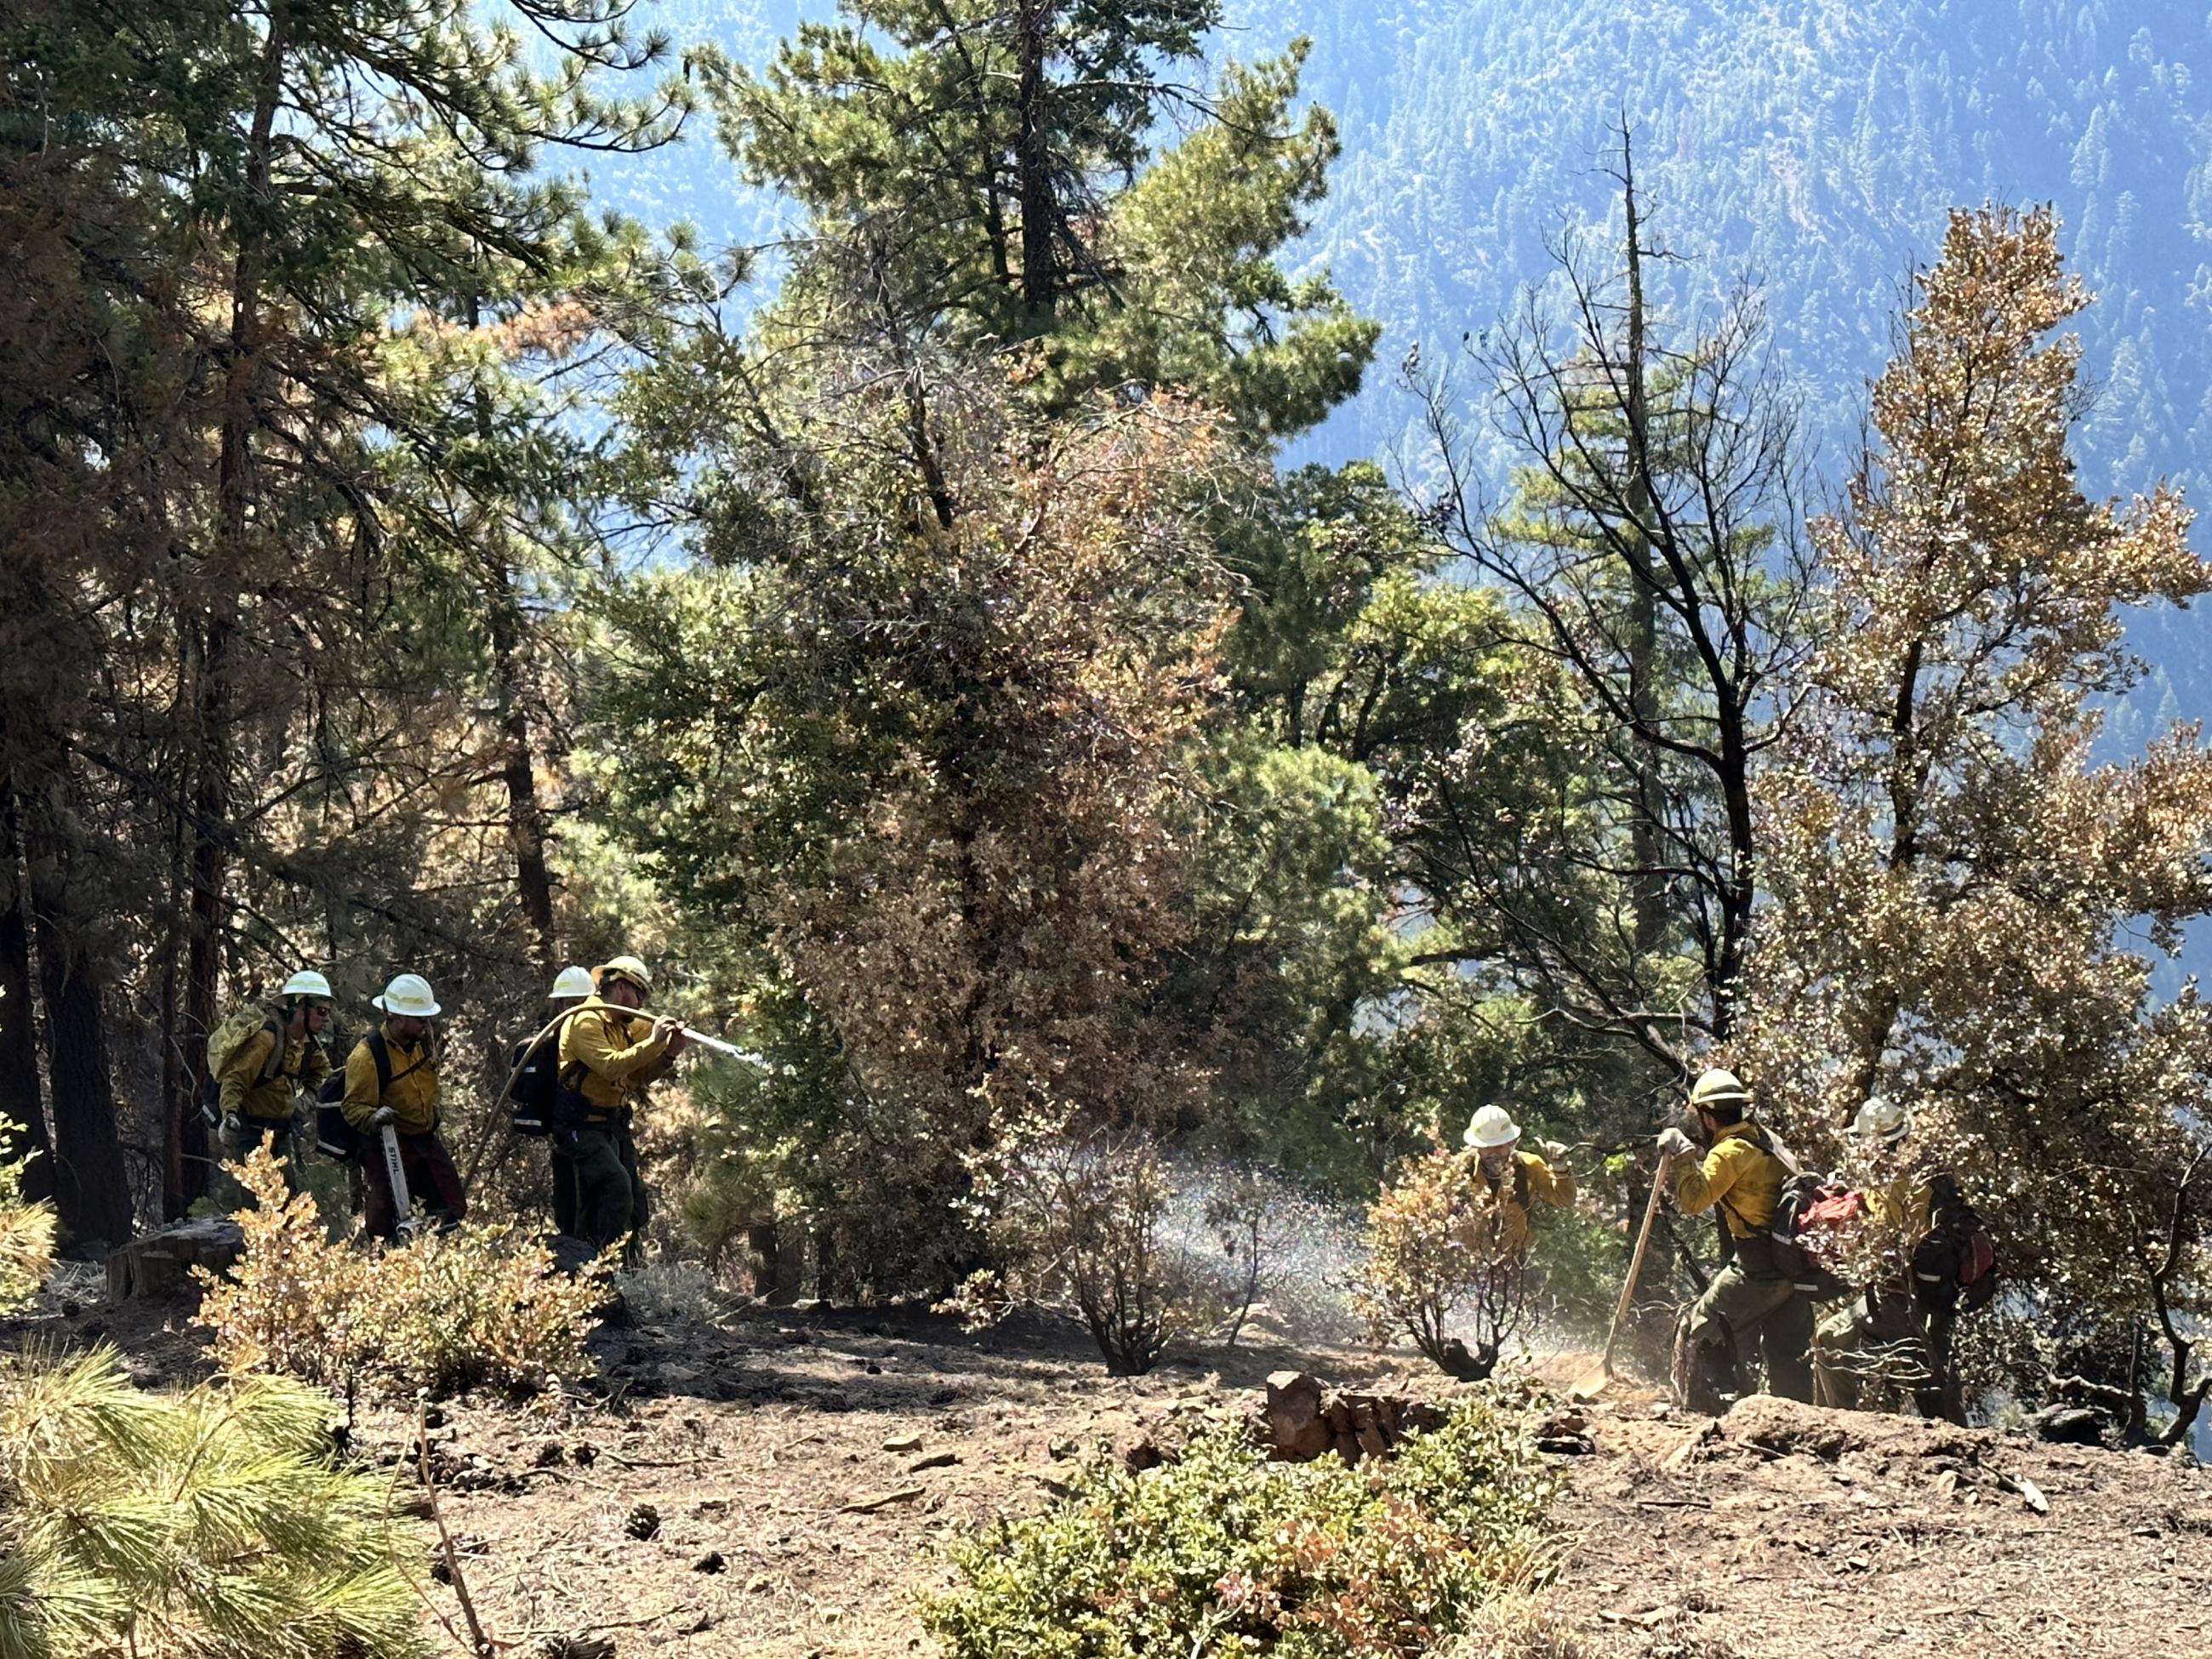 Image of firefighters with a hose spraying water on a burned area to make sure the fire is completely out. Photo USDA Forest Service courtesy Martin Lopez